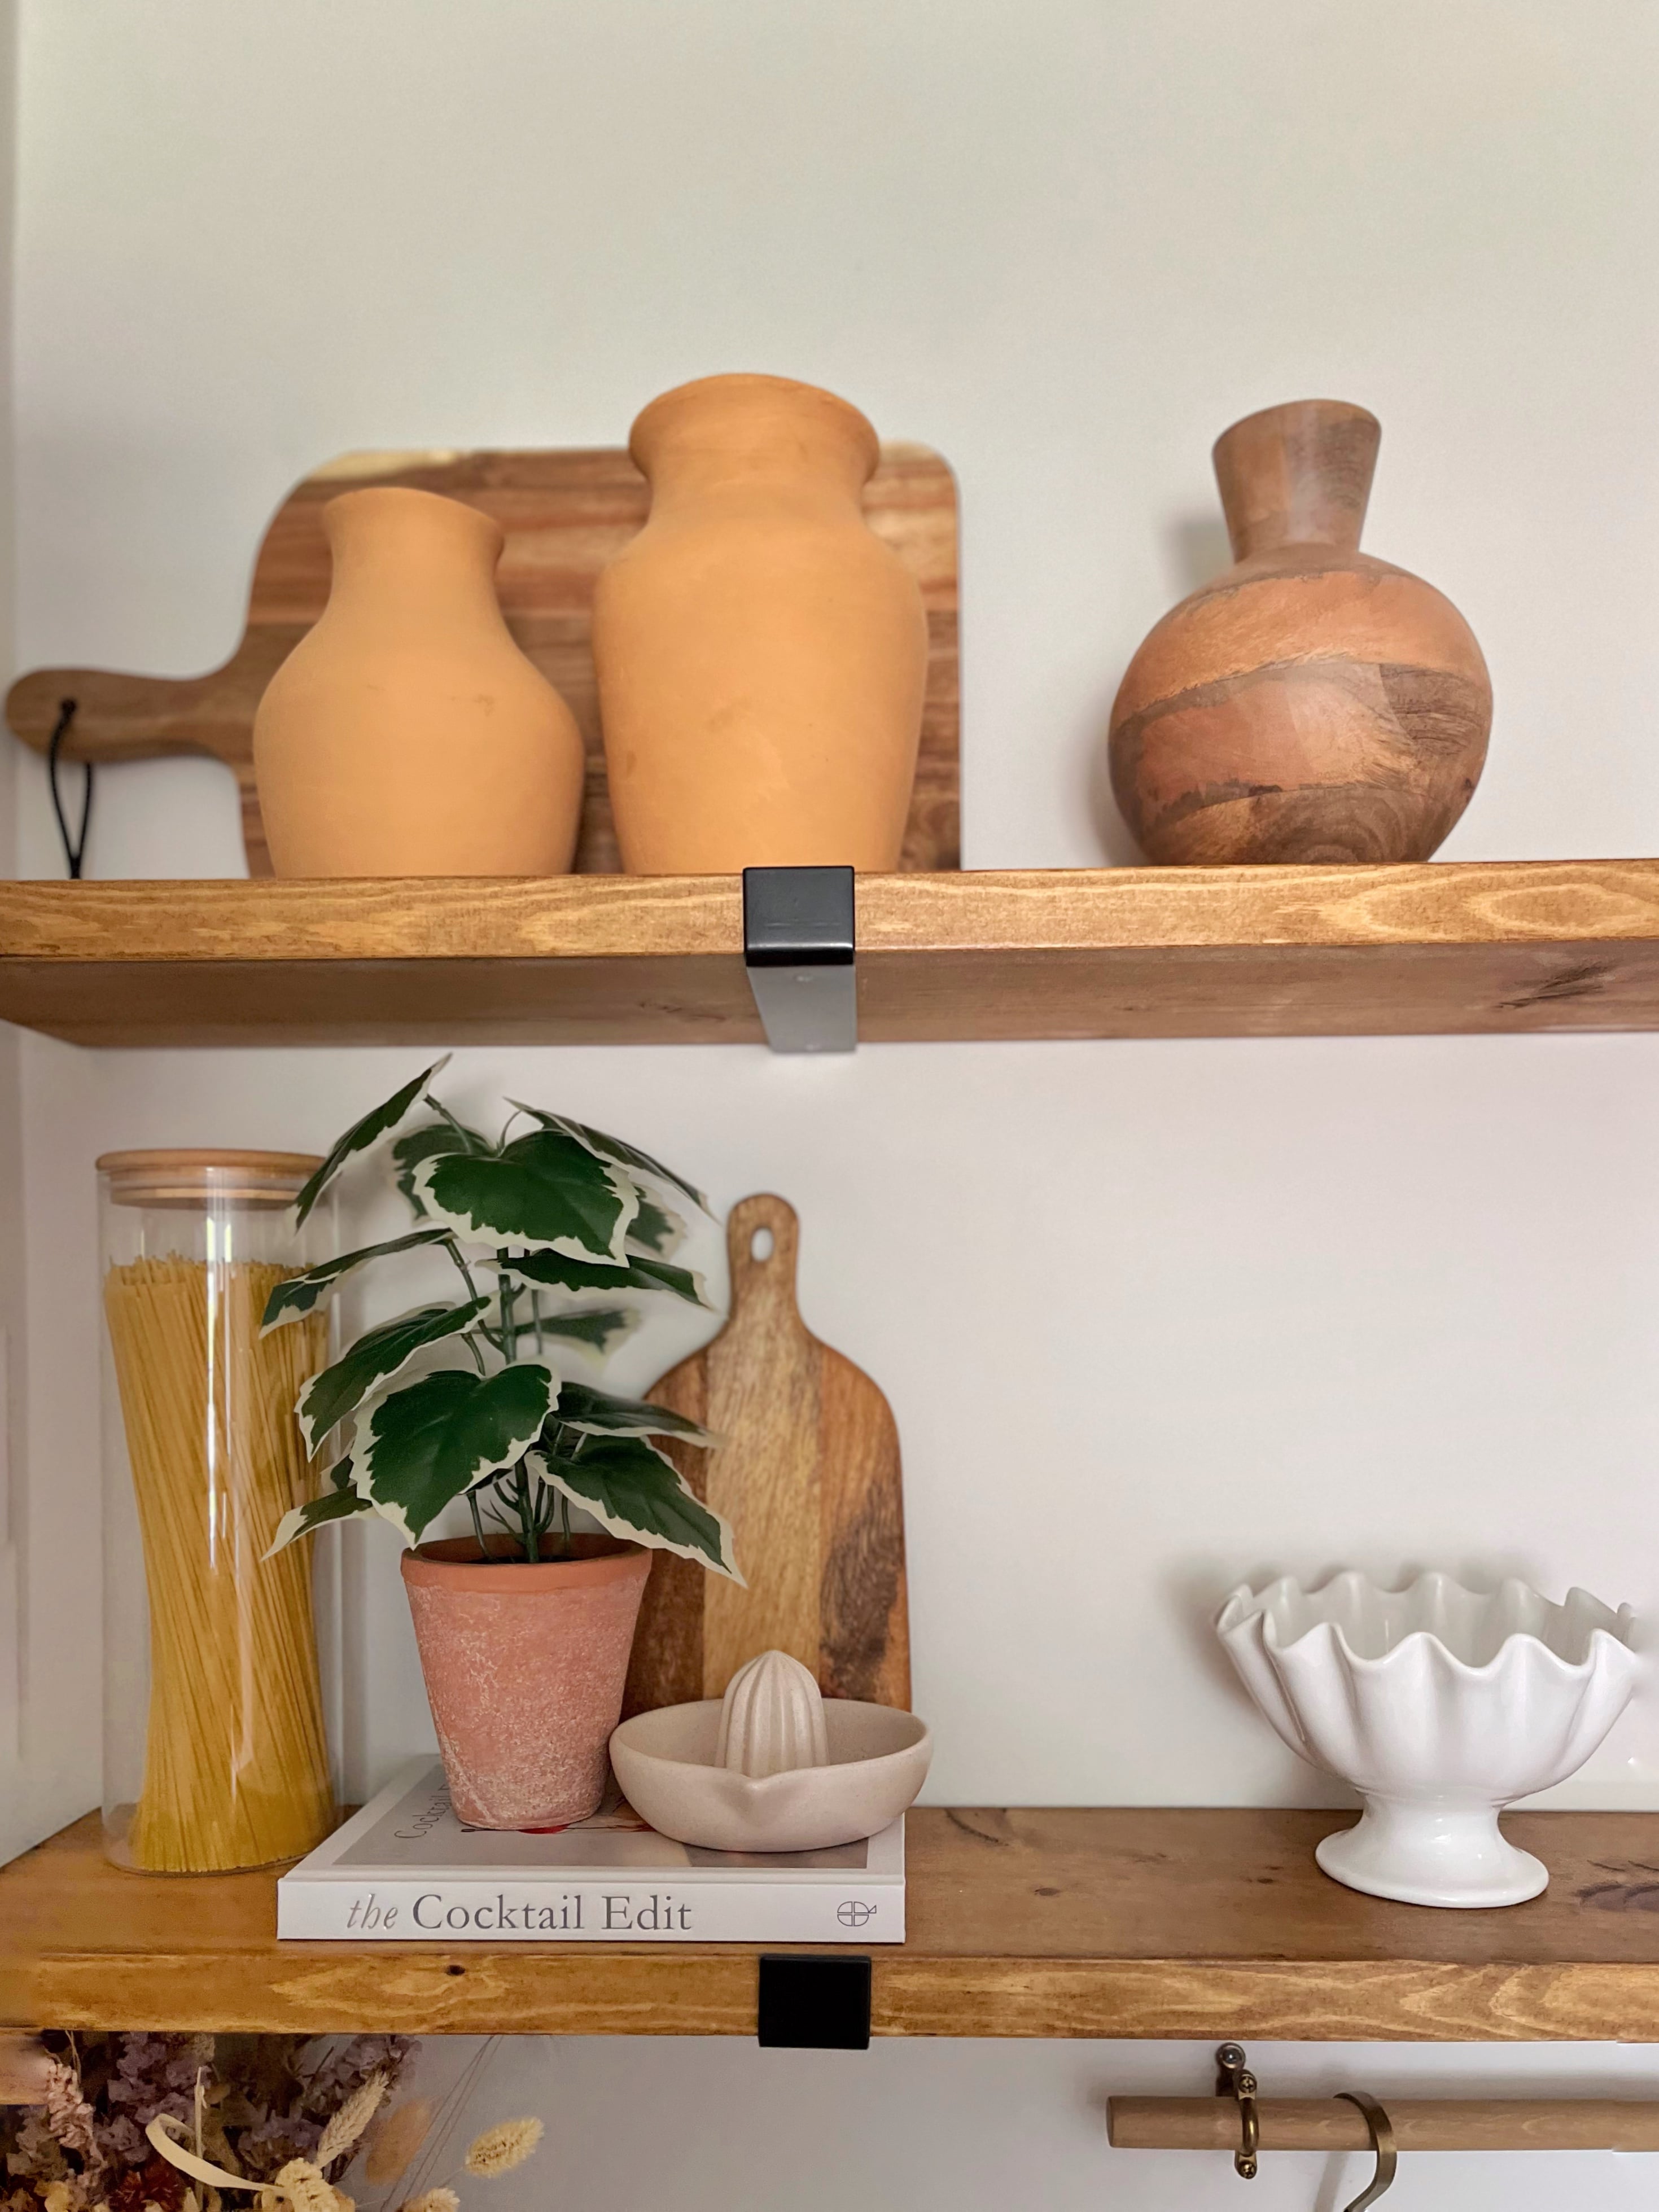 Open kitchen shelf styling. Scaffold board shelves styled in farmhouse style. Budget kitchen inspiration for your home decor